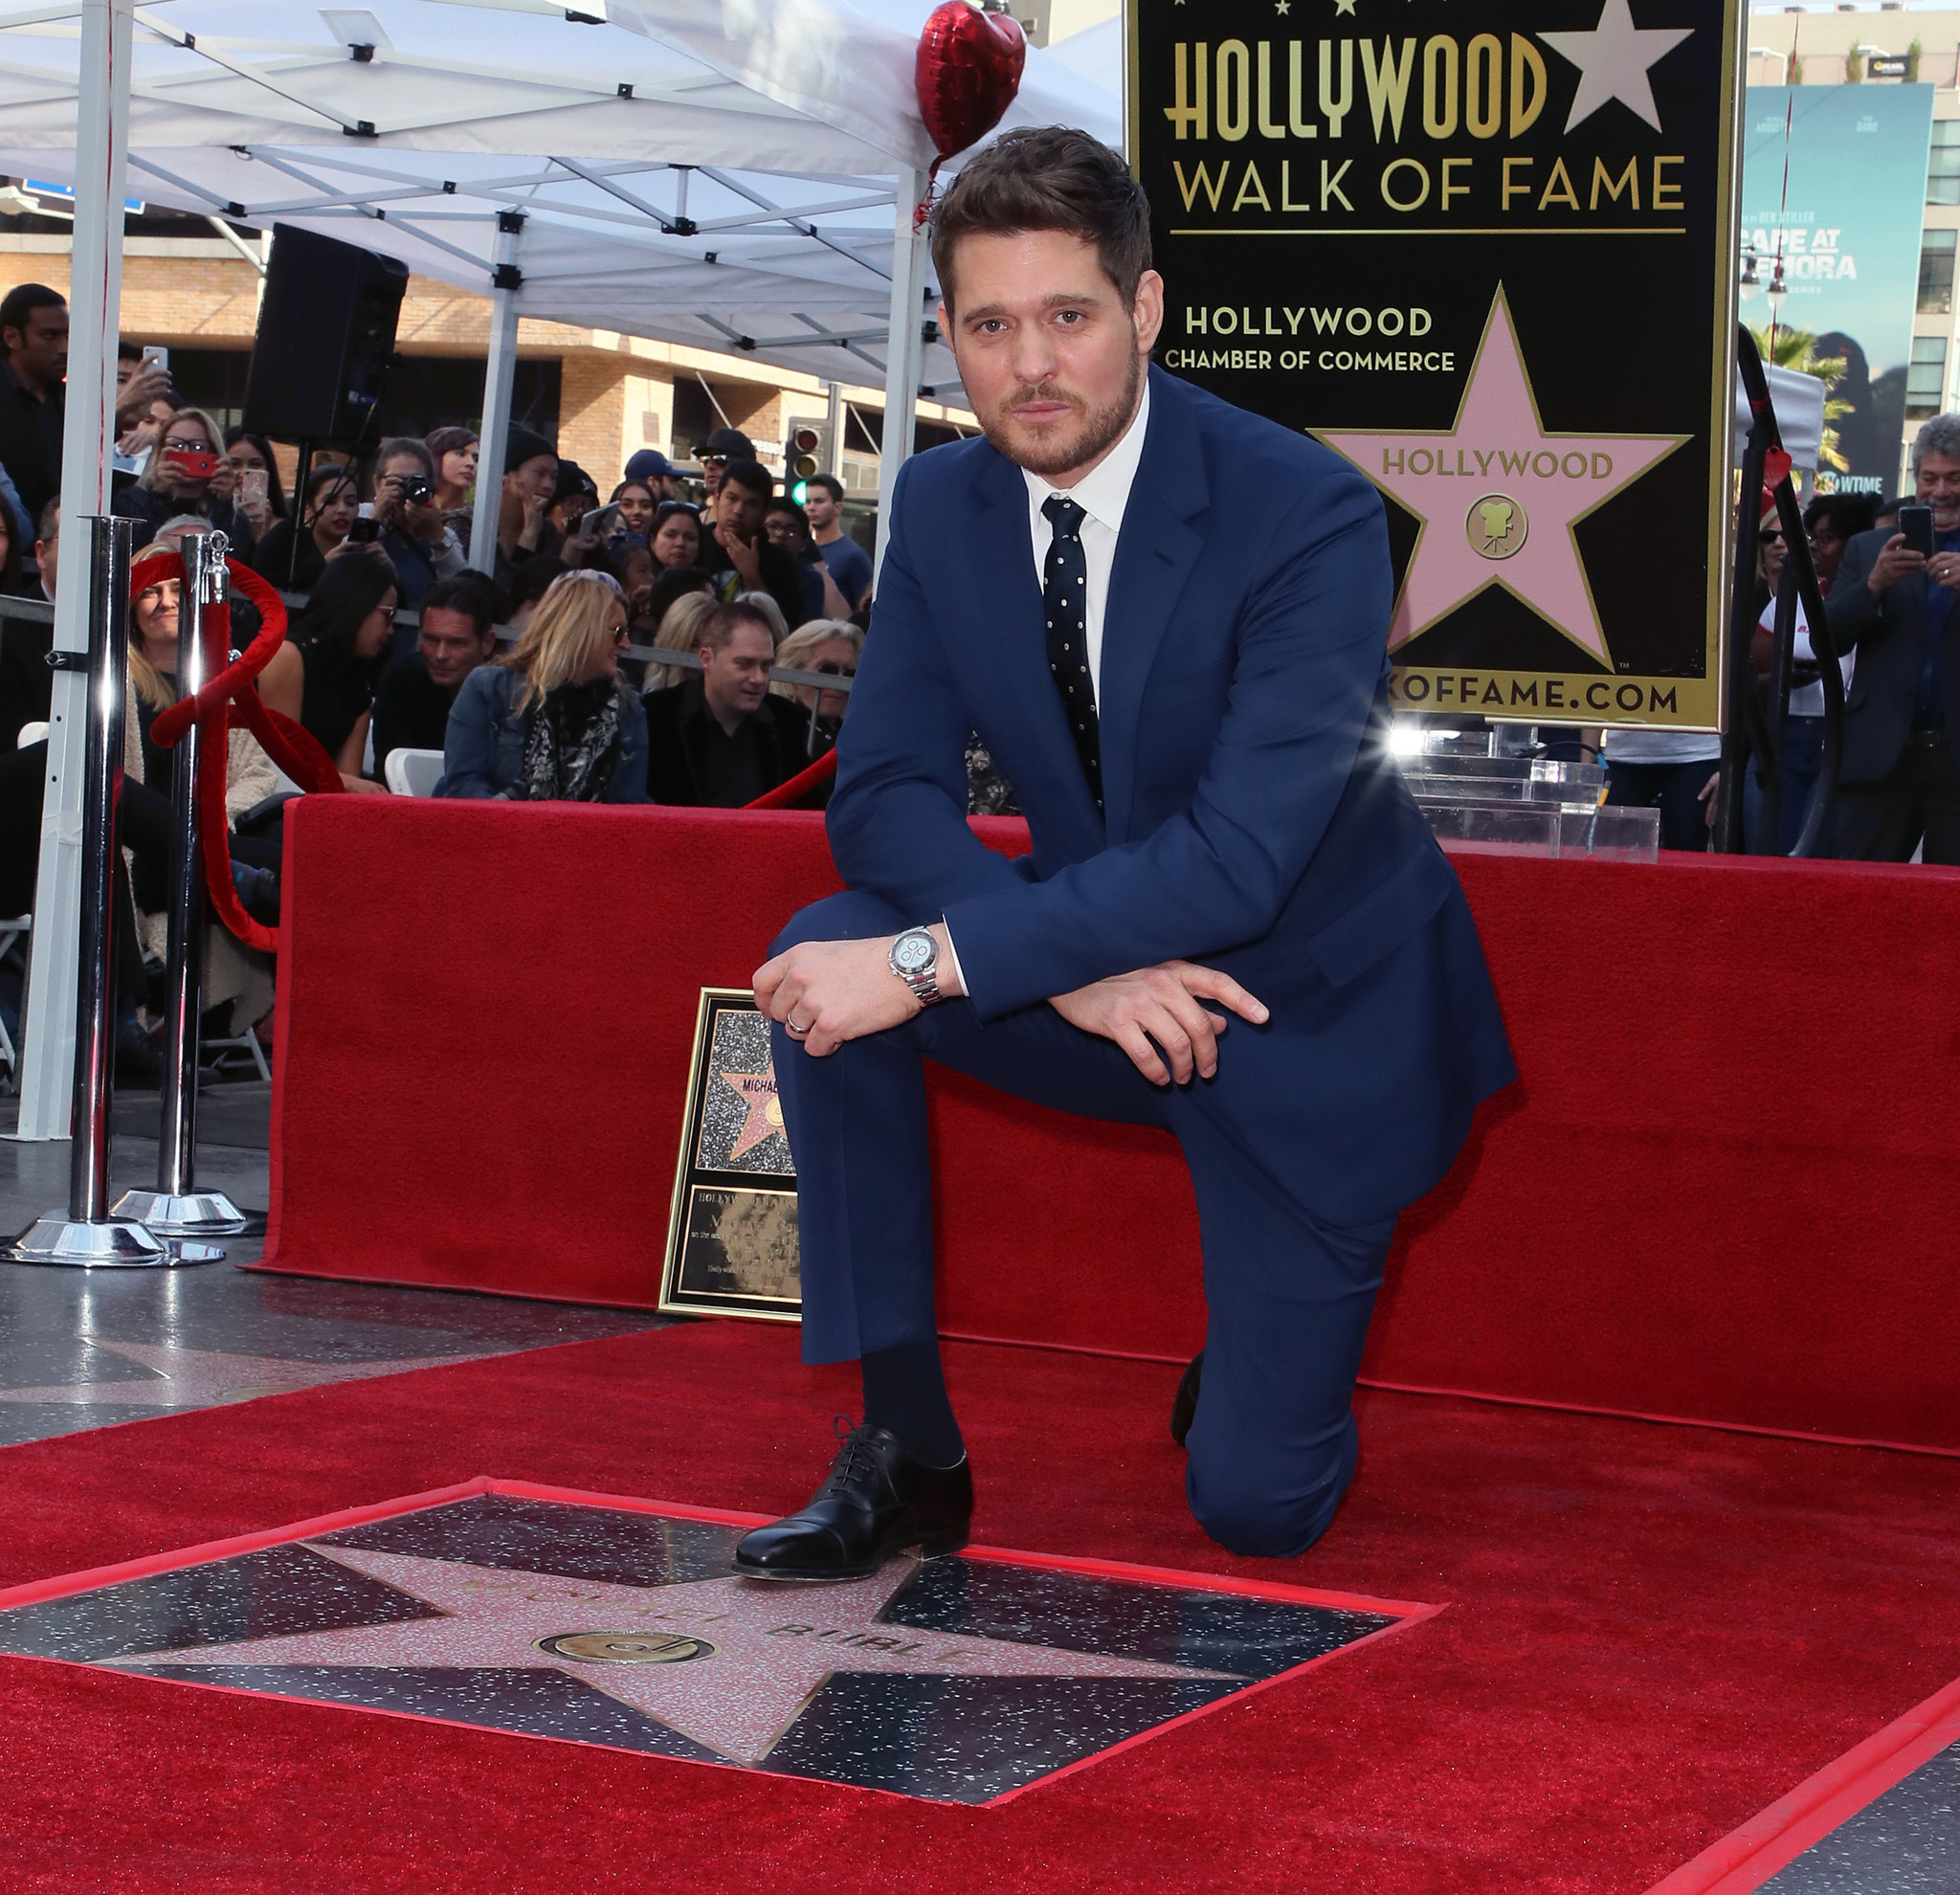 Michale Buble was the latest star to receive a star on the Hollywood Walk of Fame on Nov. 16, 2018, and his acceptance ceremony was an emotional one. His wife Luisana Lopilato couldn't hold back her tears as the 